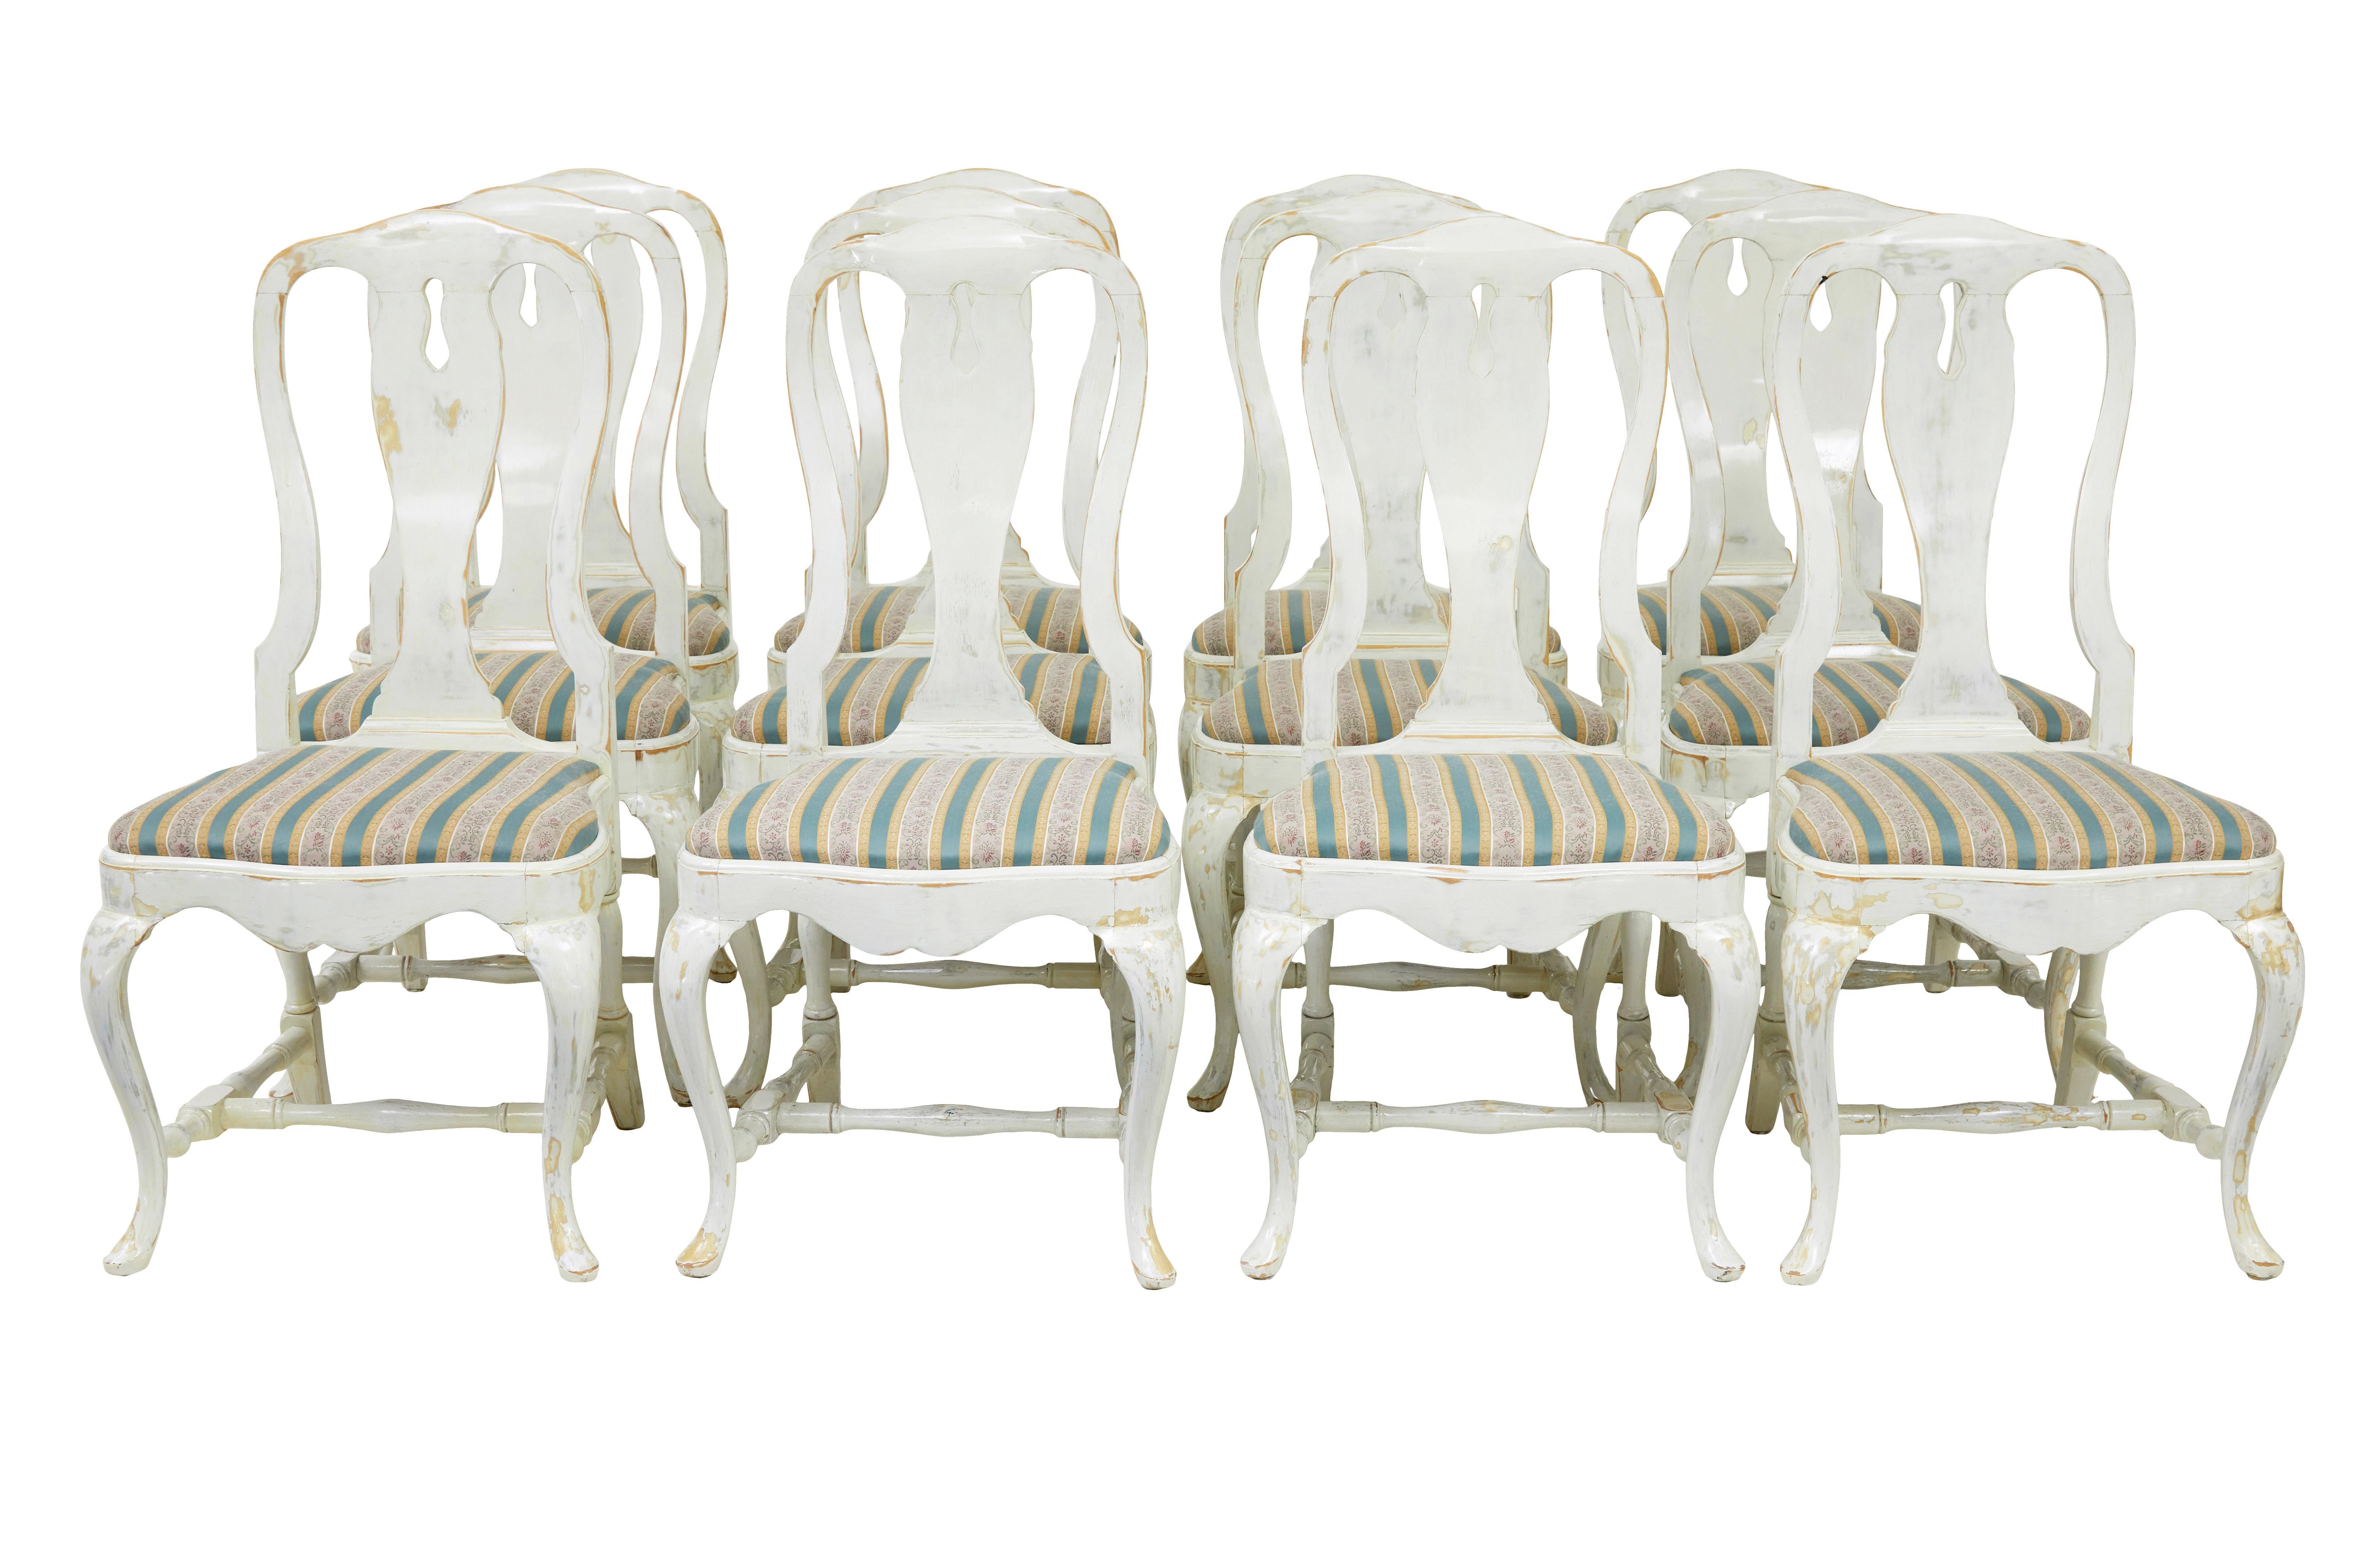 Set of 14 lacquered queen anne influenced dining chairs circa 1920.

Set comprises of 12 single chairs and 2 carver armchairs.  Made in beech and later painted white, this paint has been rubbed through in places to create a worn effect with a